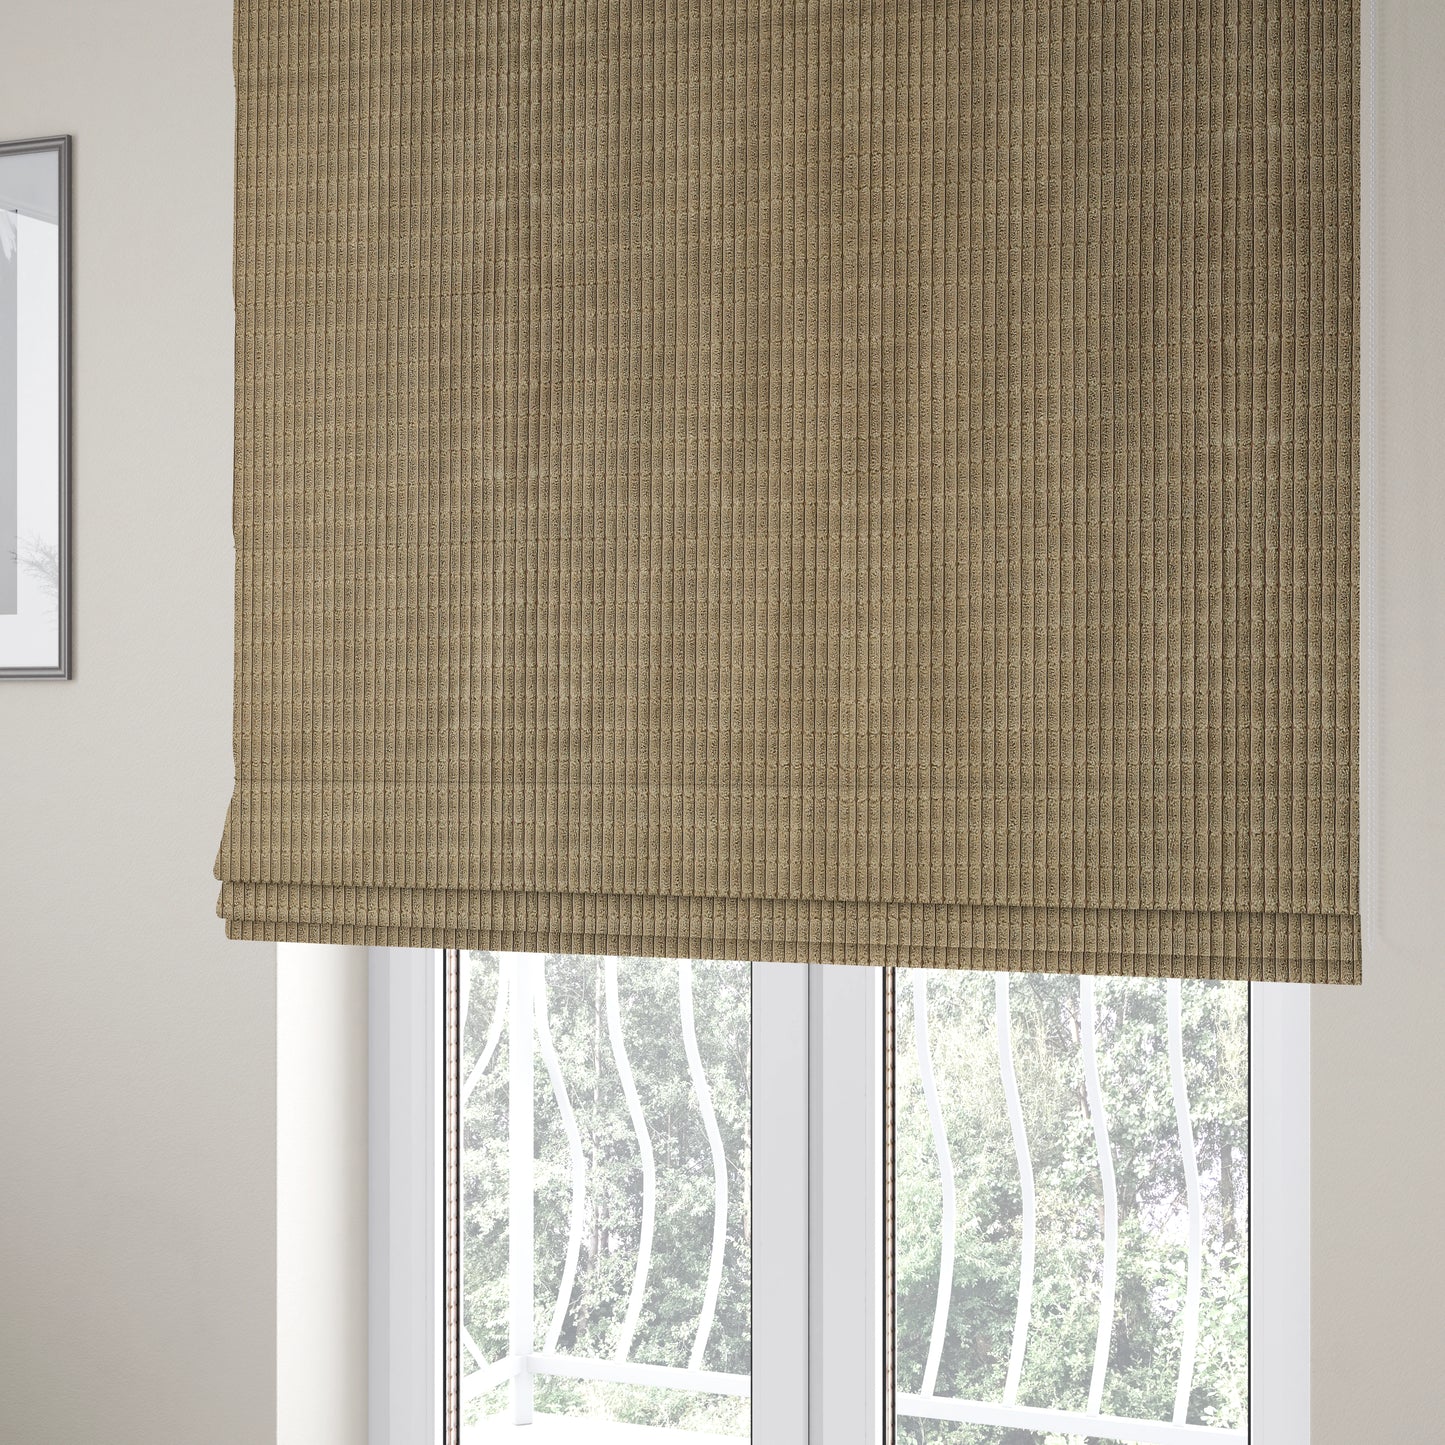 Didcot Brick Effect Corduroy Fabric In Mink Colour - Roman Blinds